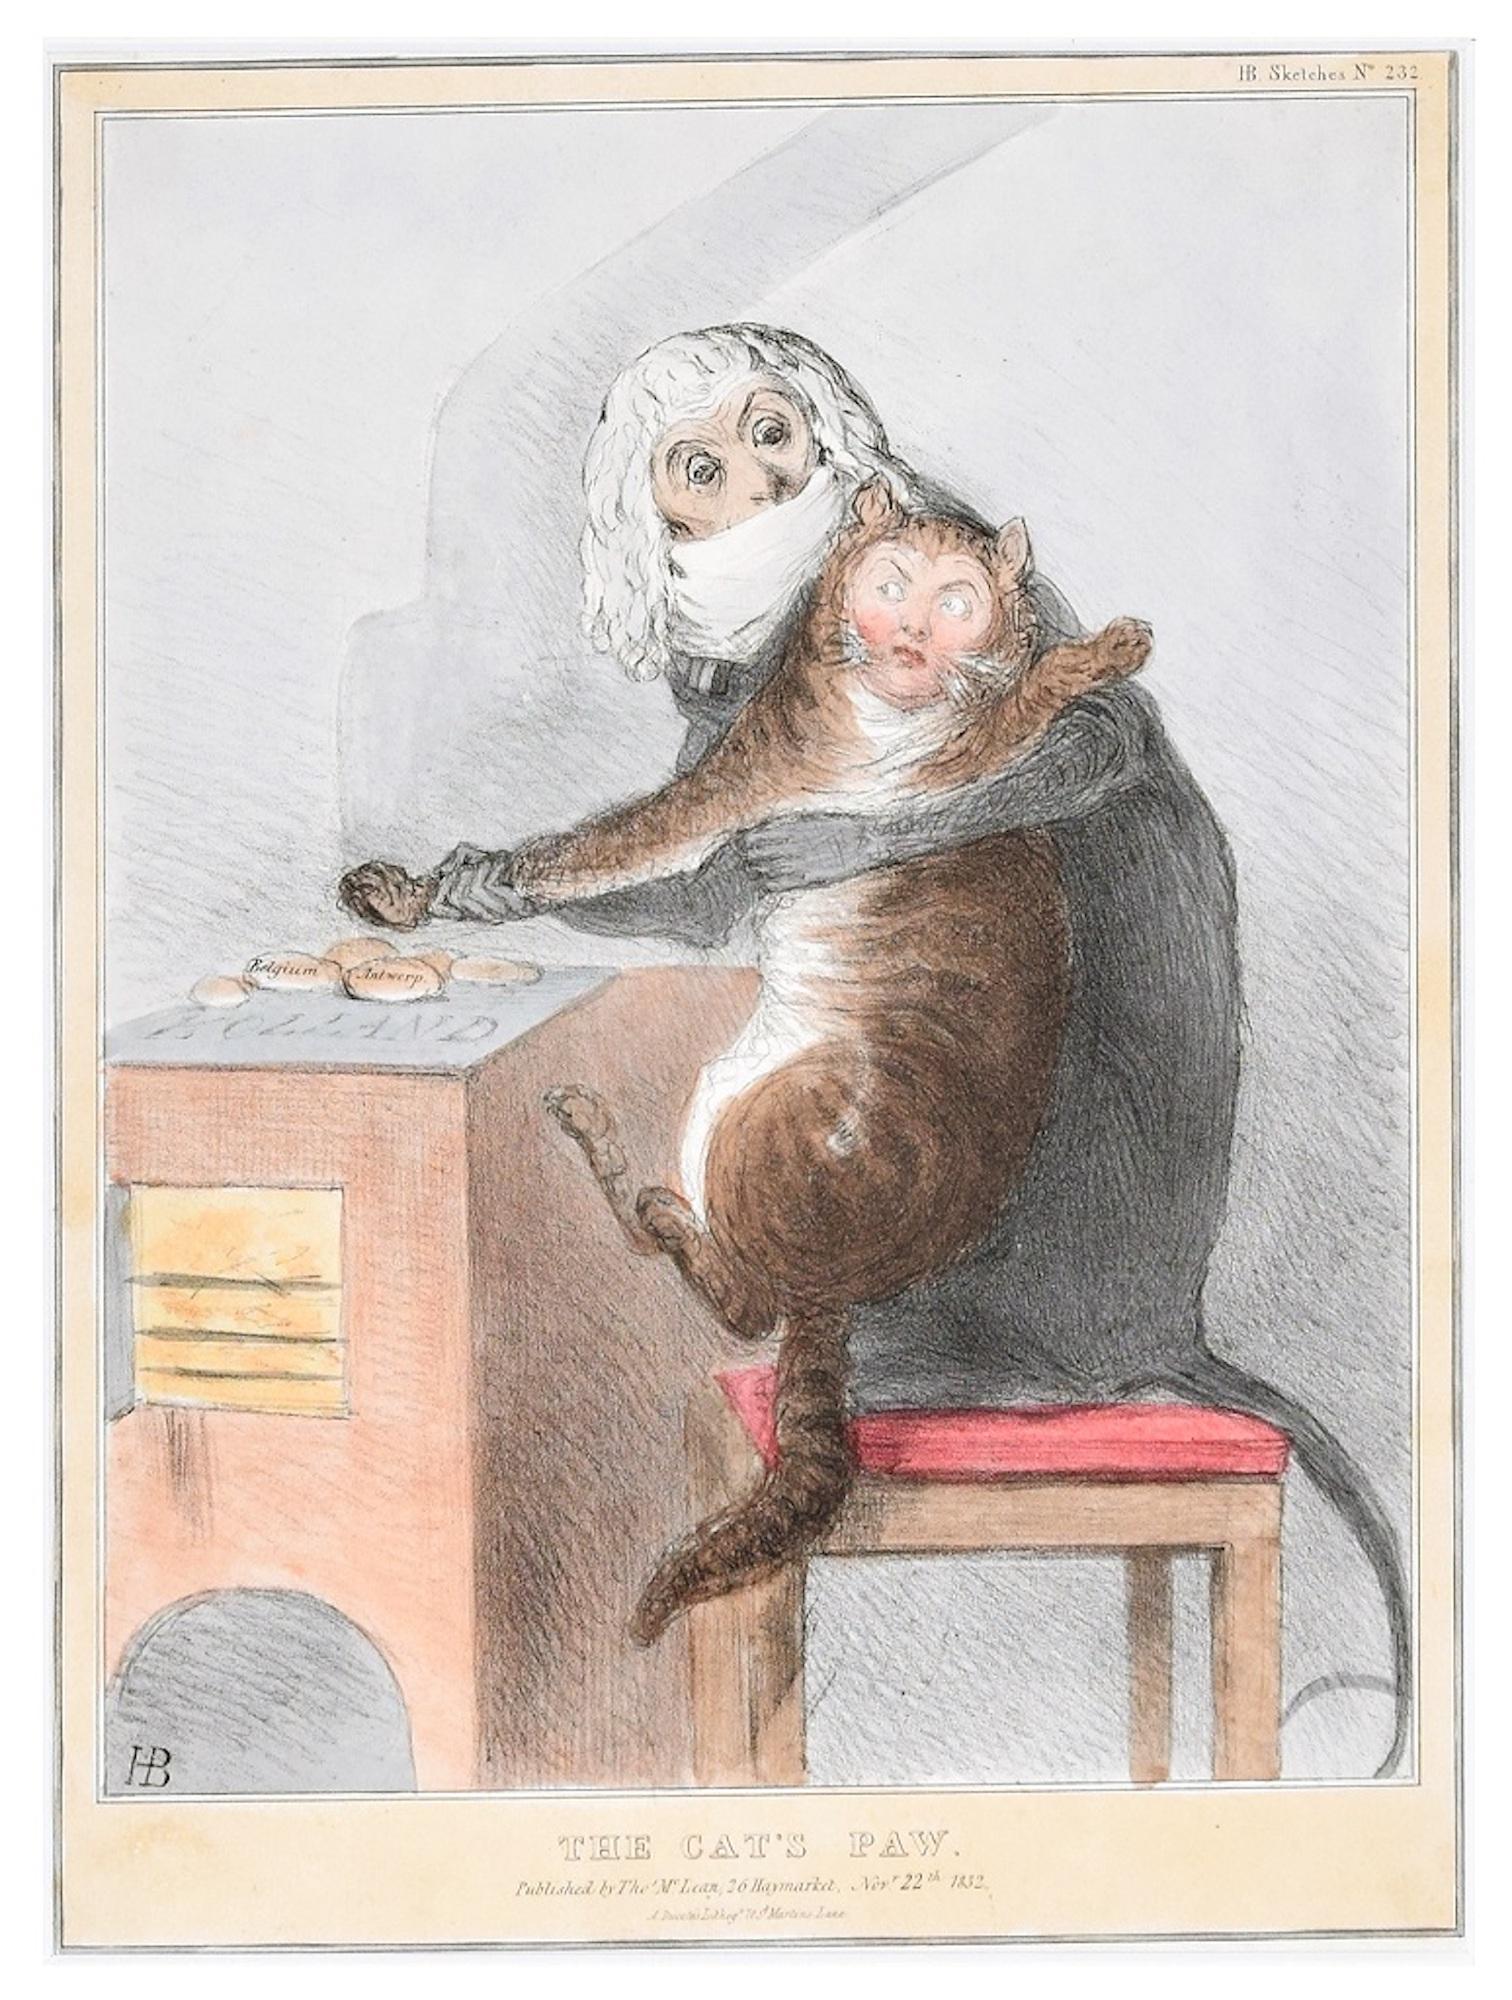 John Doyle Figurative Print - The Cat's Paw  – Reform Bill! - Lithograph by J. Doyle - 1831